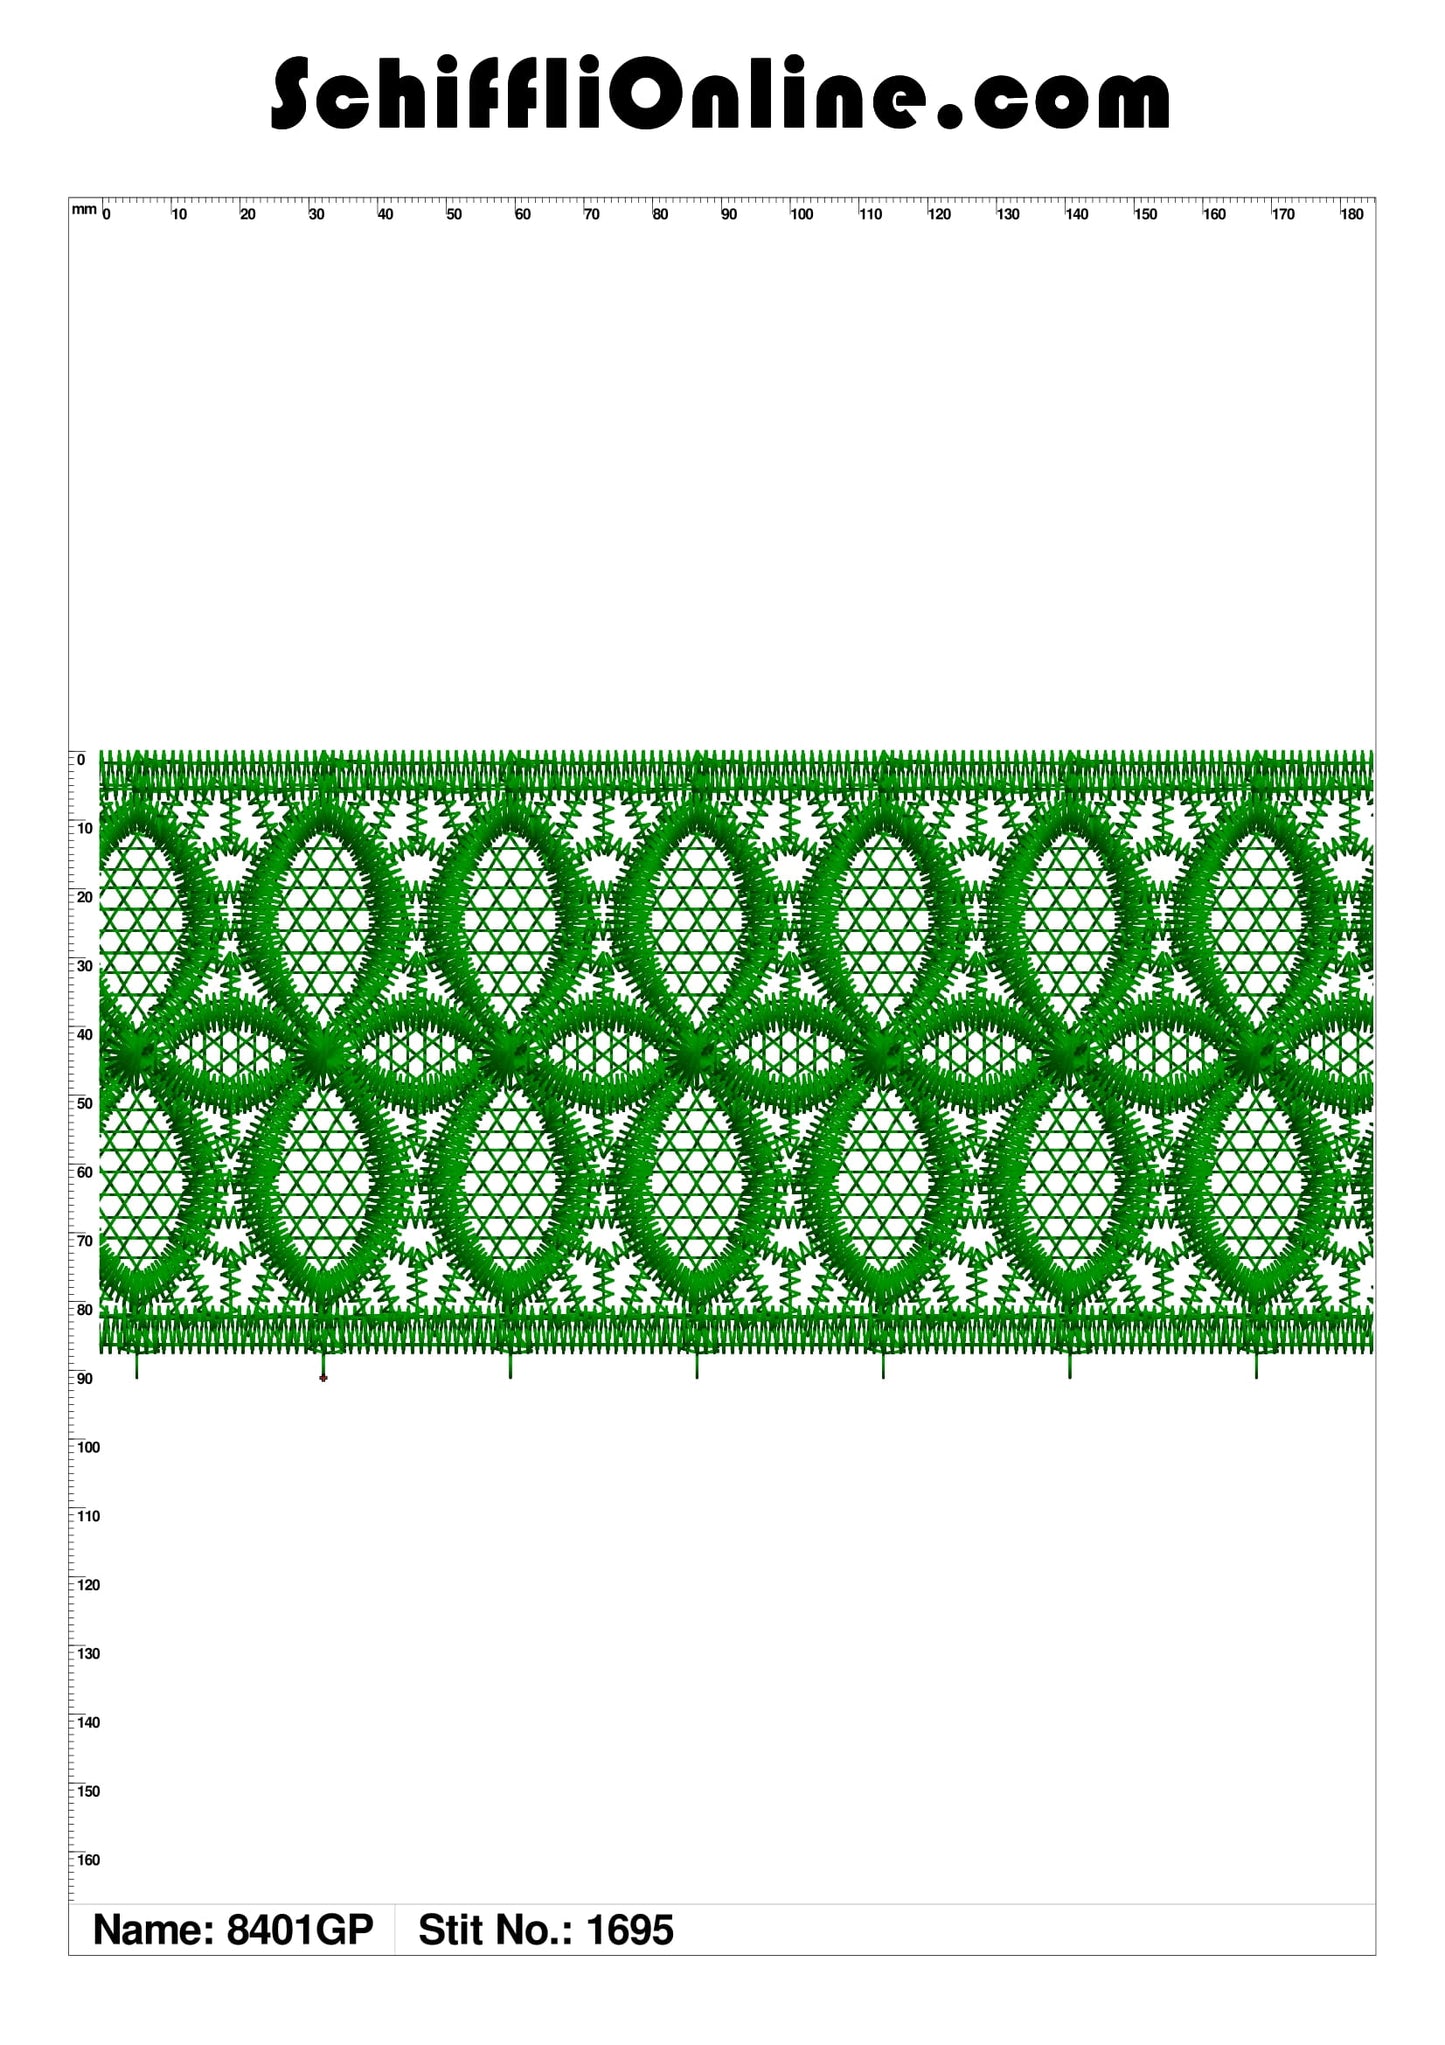 Book 174 CHEMICAL LACE 4X4 50 DESIGNS